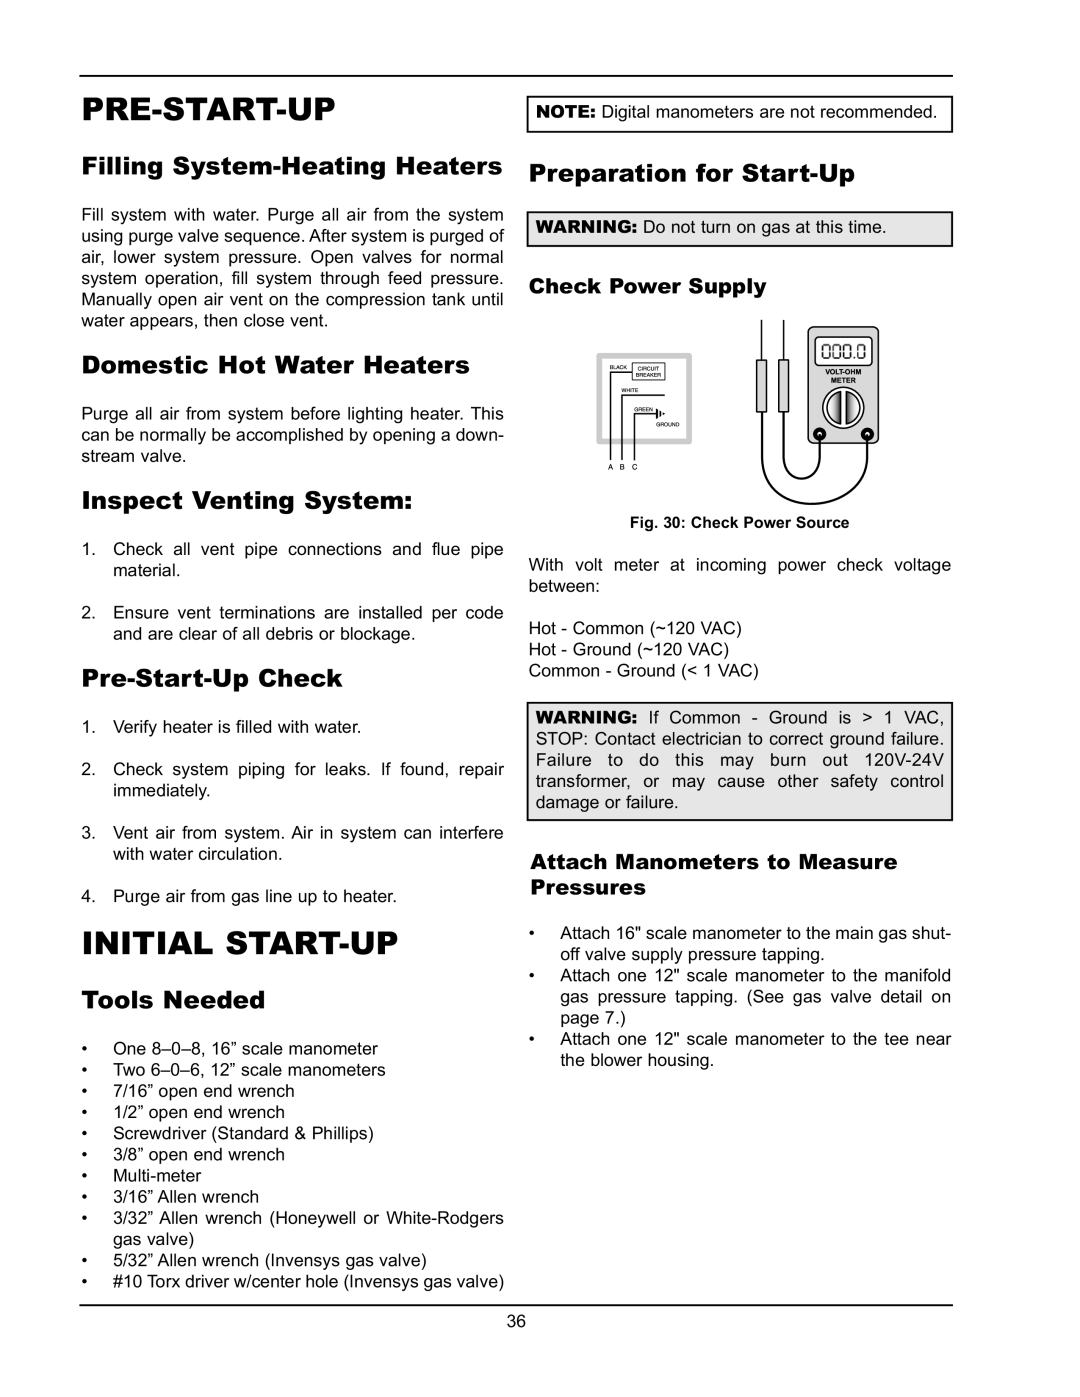 Raypak HD401, HD101 Initial Start-Up, Filling System-HeatingHeaters, Domestic Hot Water Heaters, Pre-Start-UpCheck 